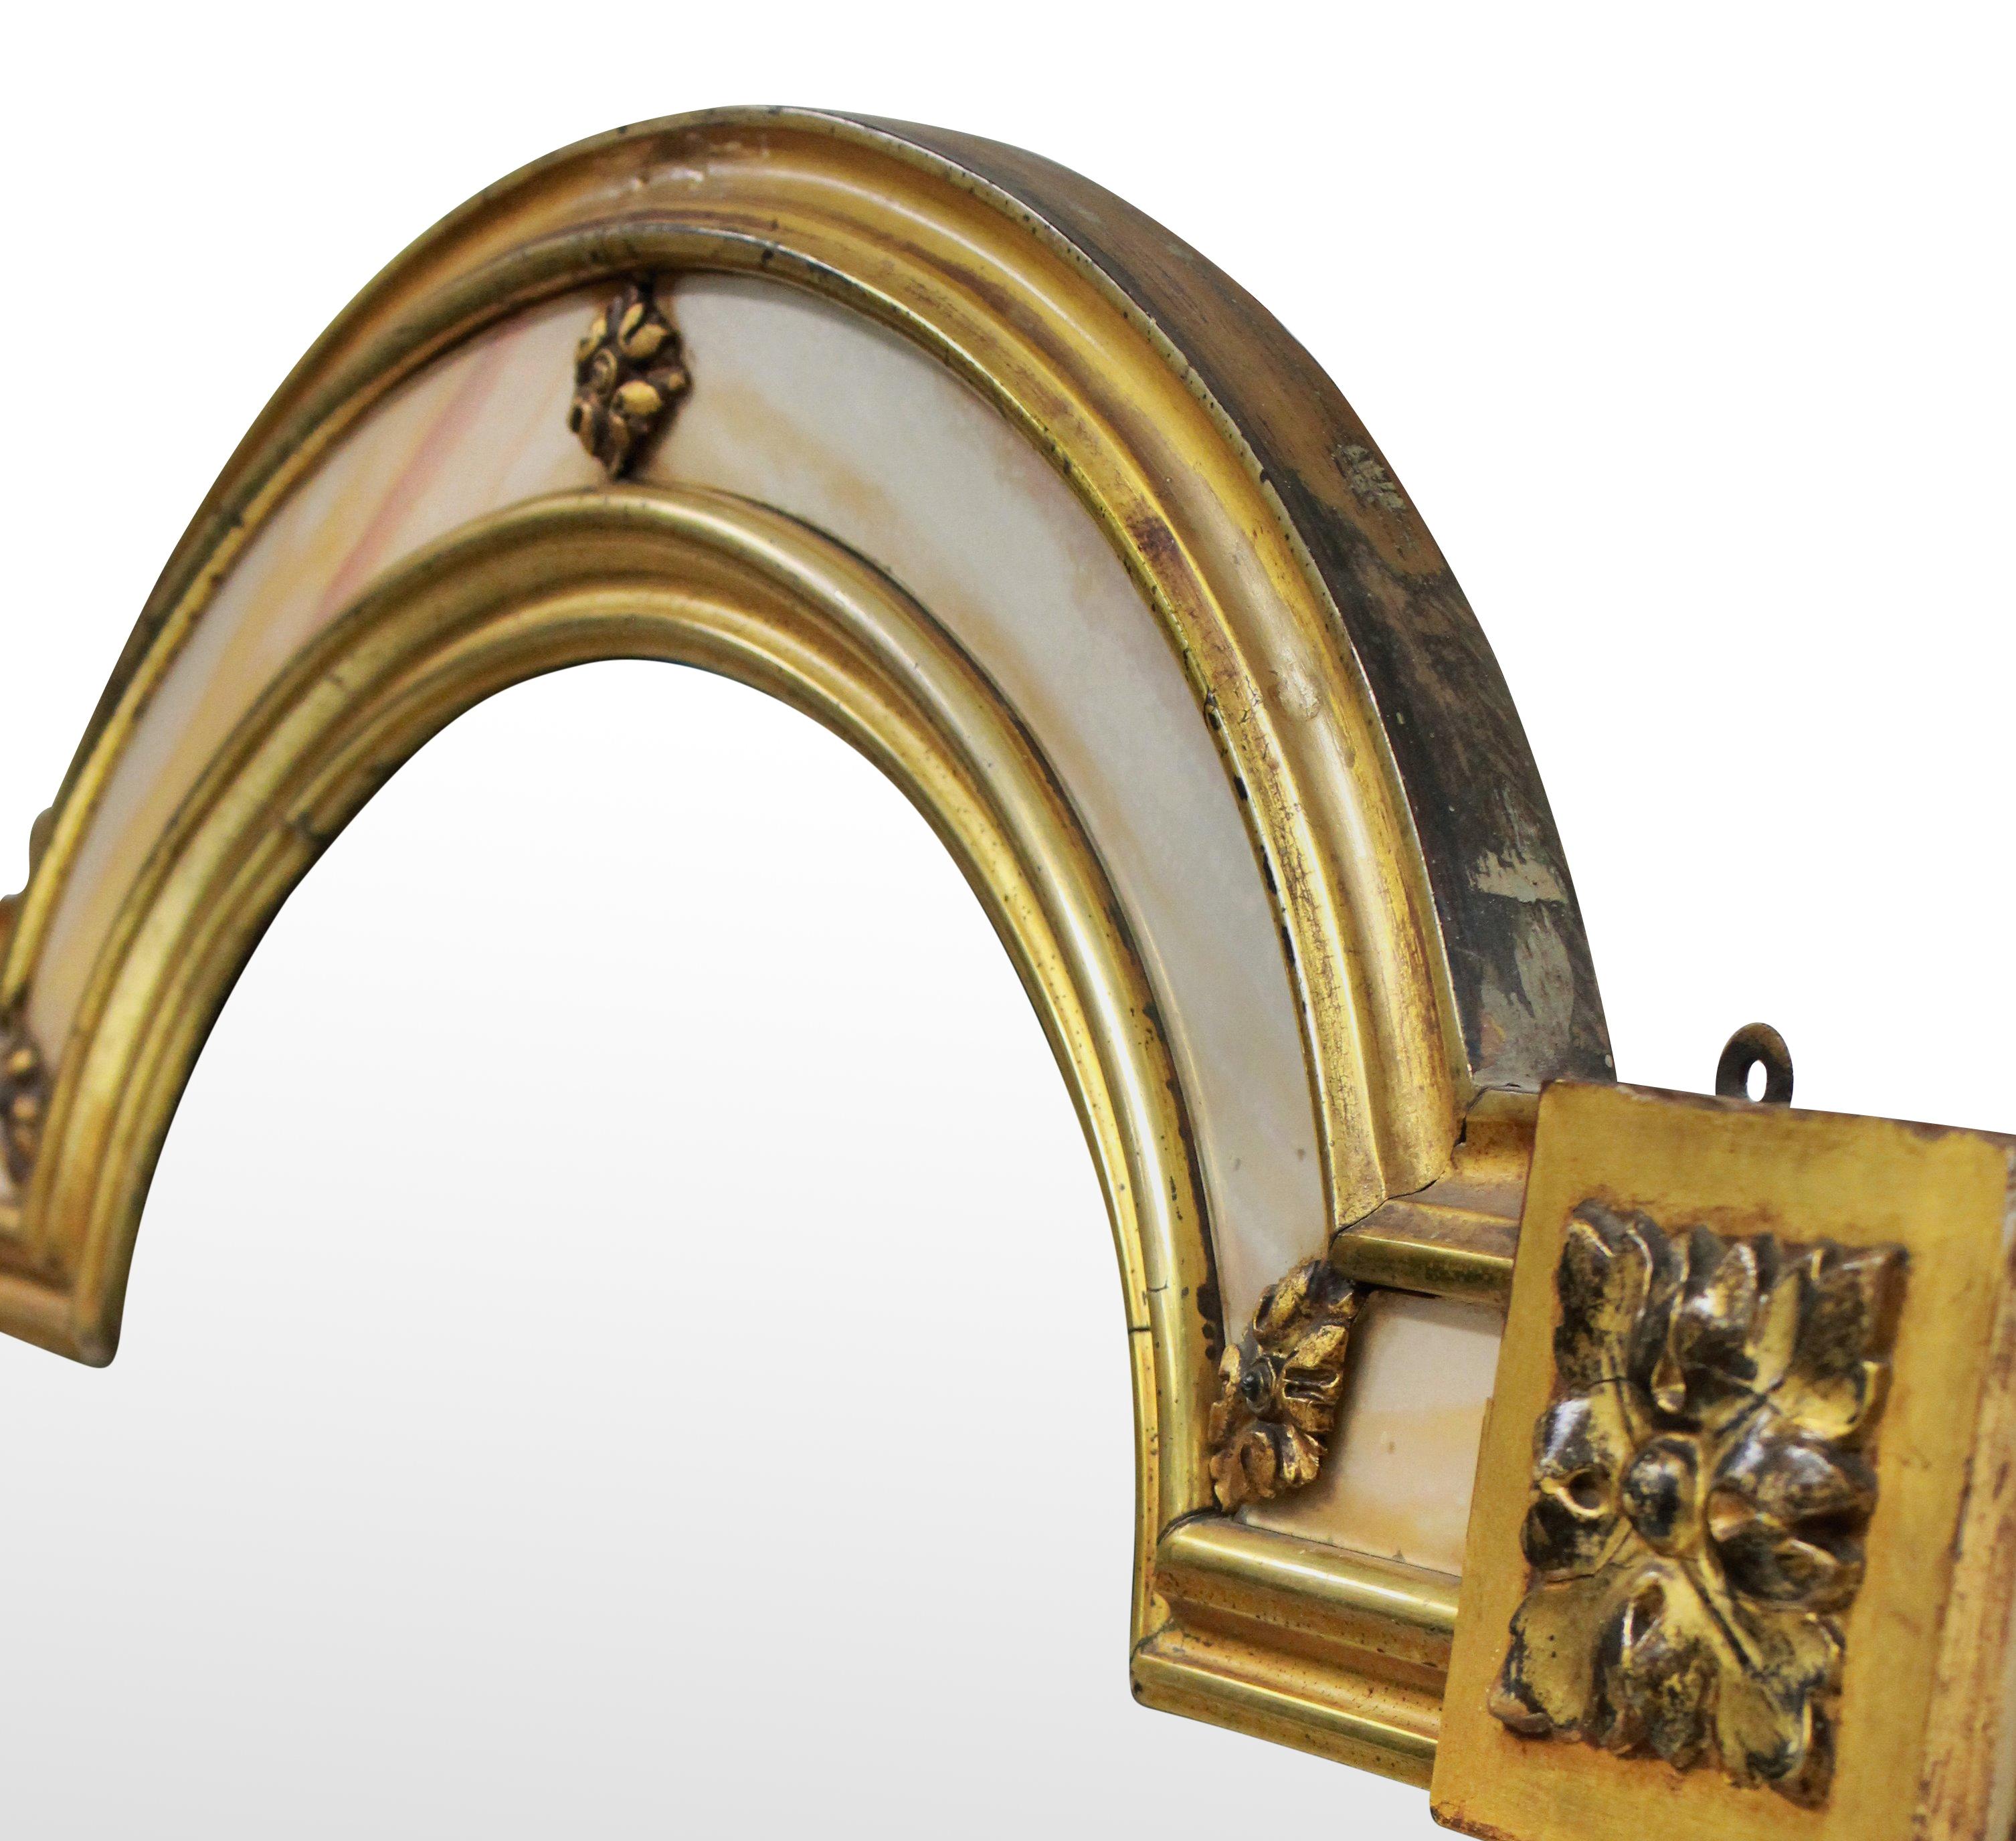 A Venetian mirror with a good water gilded frame with marble slip. The mirror plate is bevelled.

  